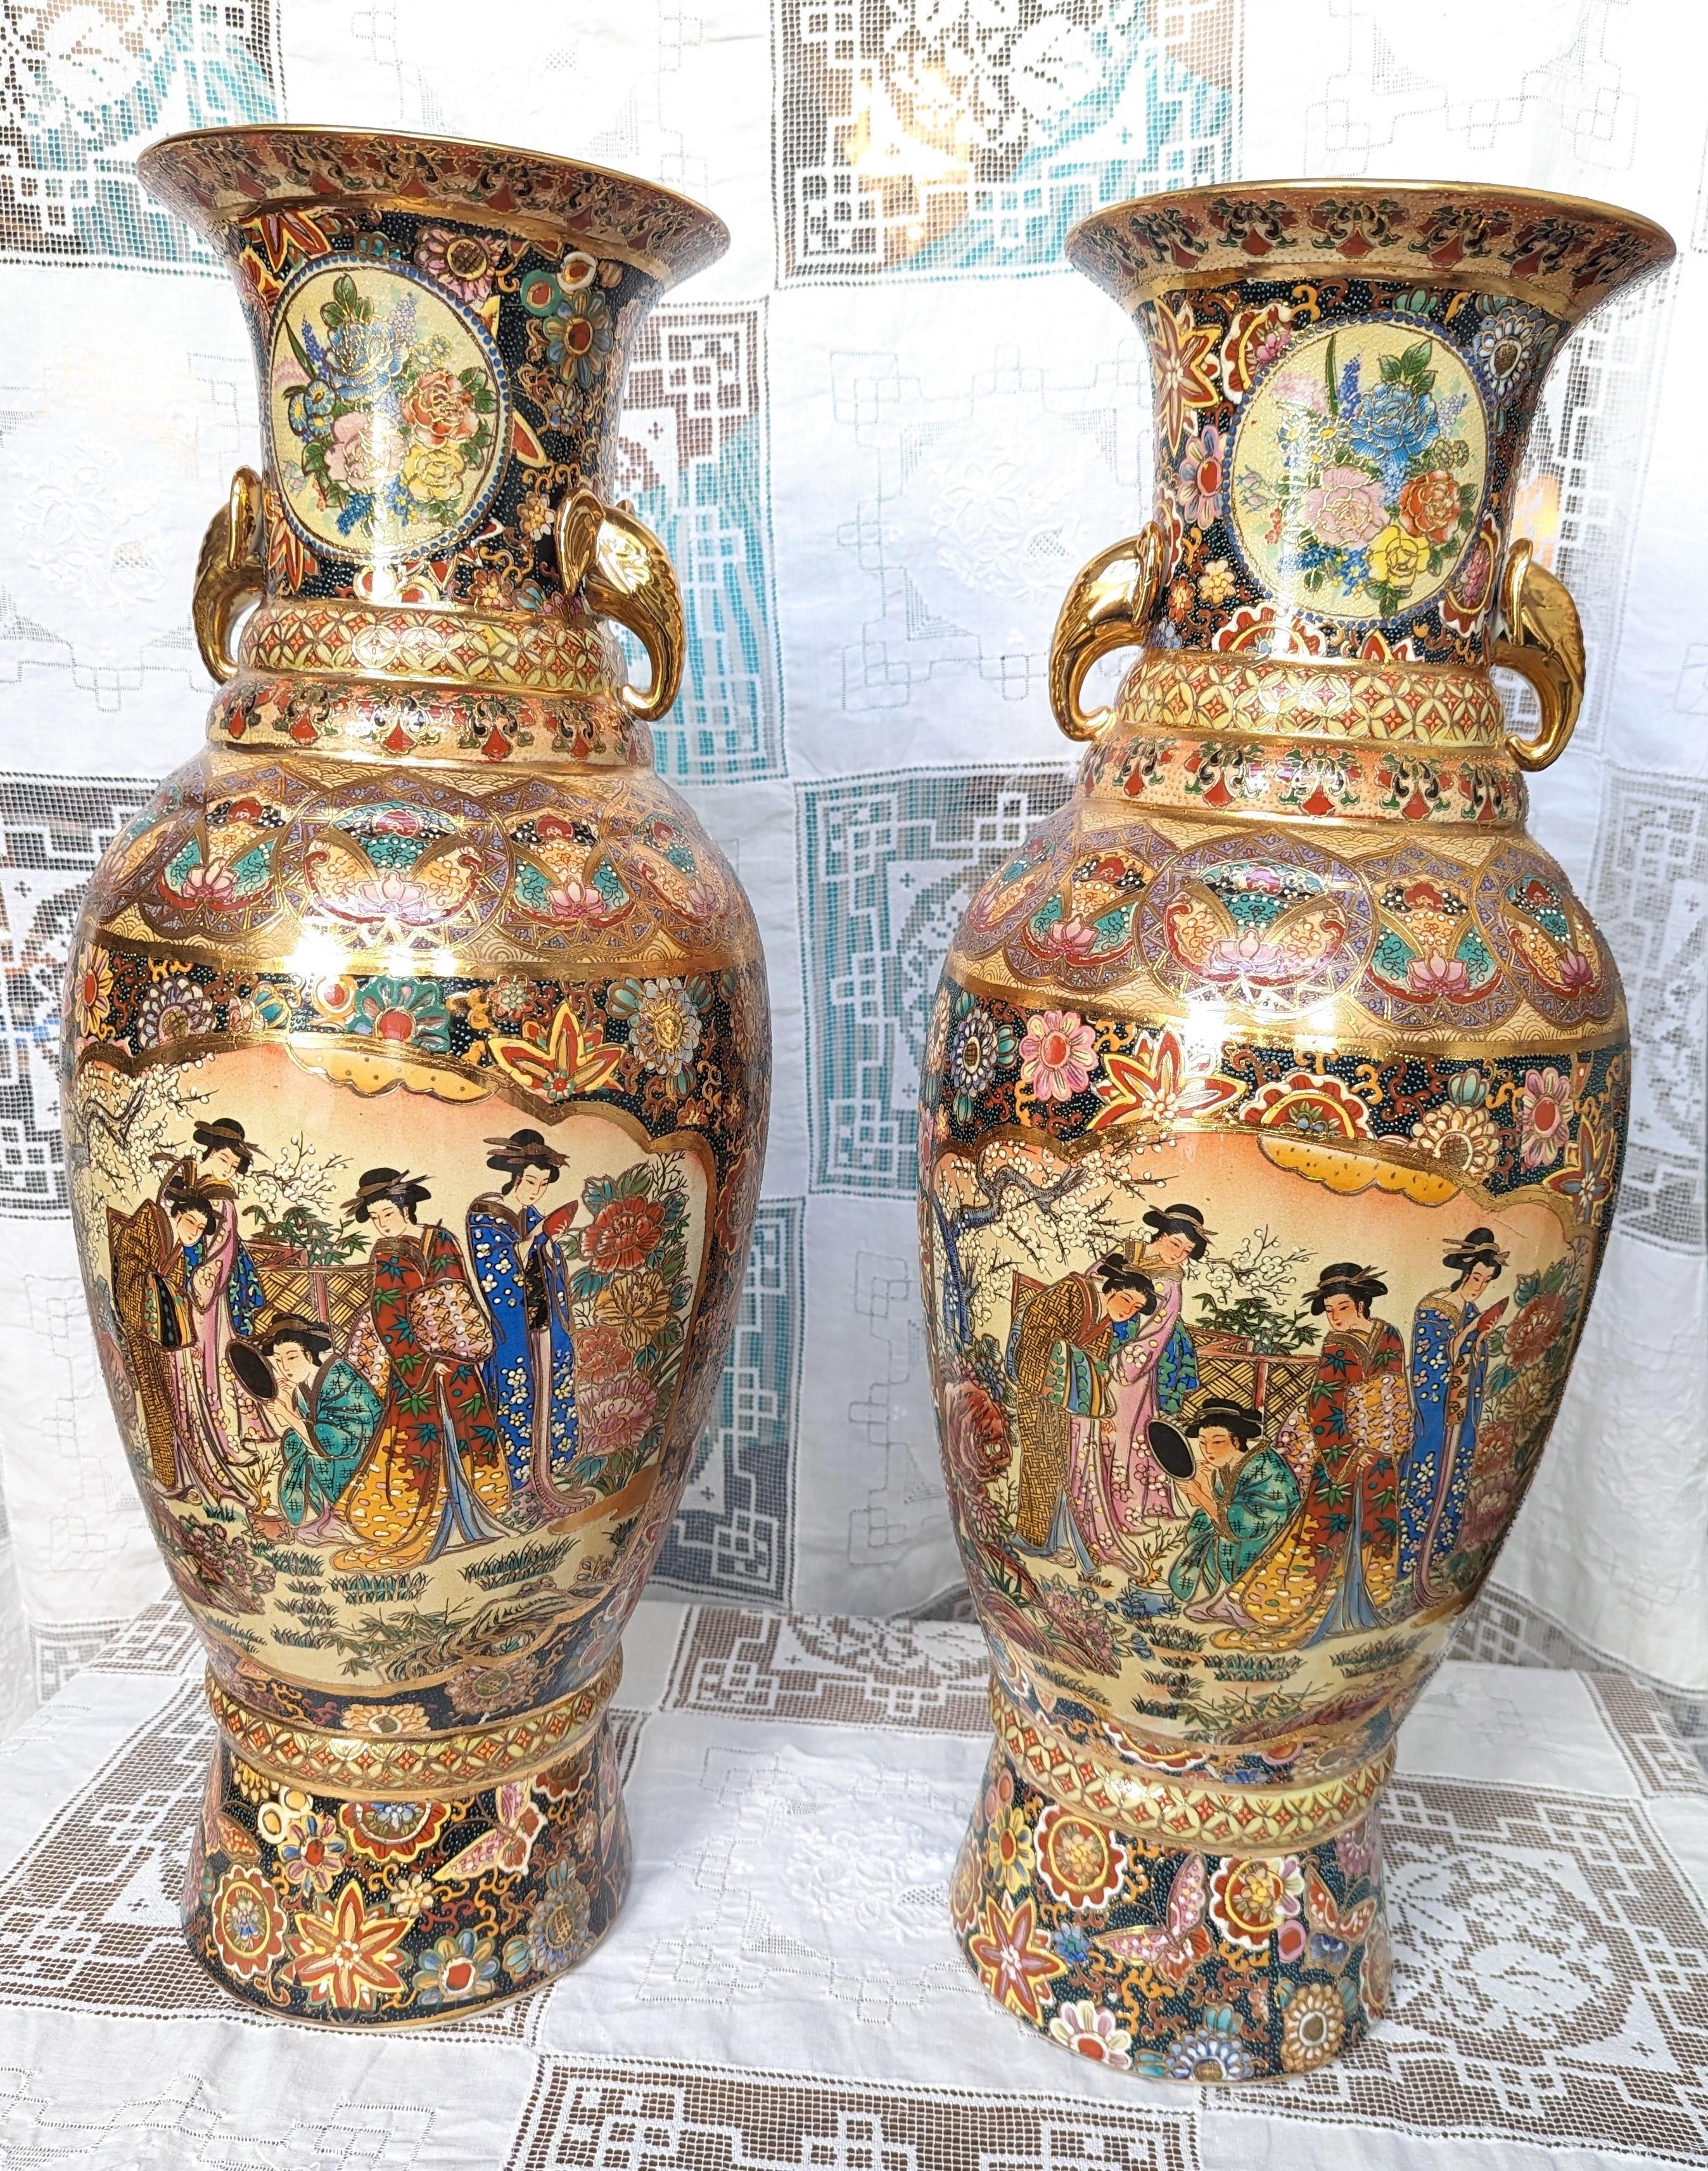 Pair of beautiful and intricately detailed Royal Satsuma vases, moriage and gilt adorn these stunning pieces of art. These tall statement pieces measure 24